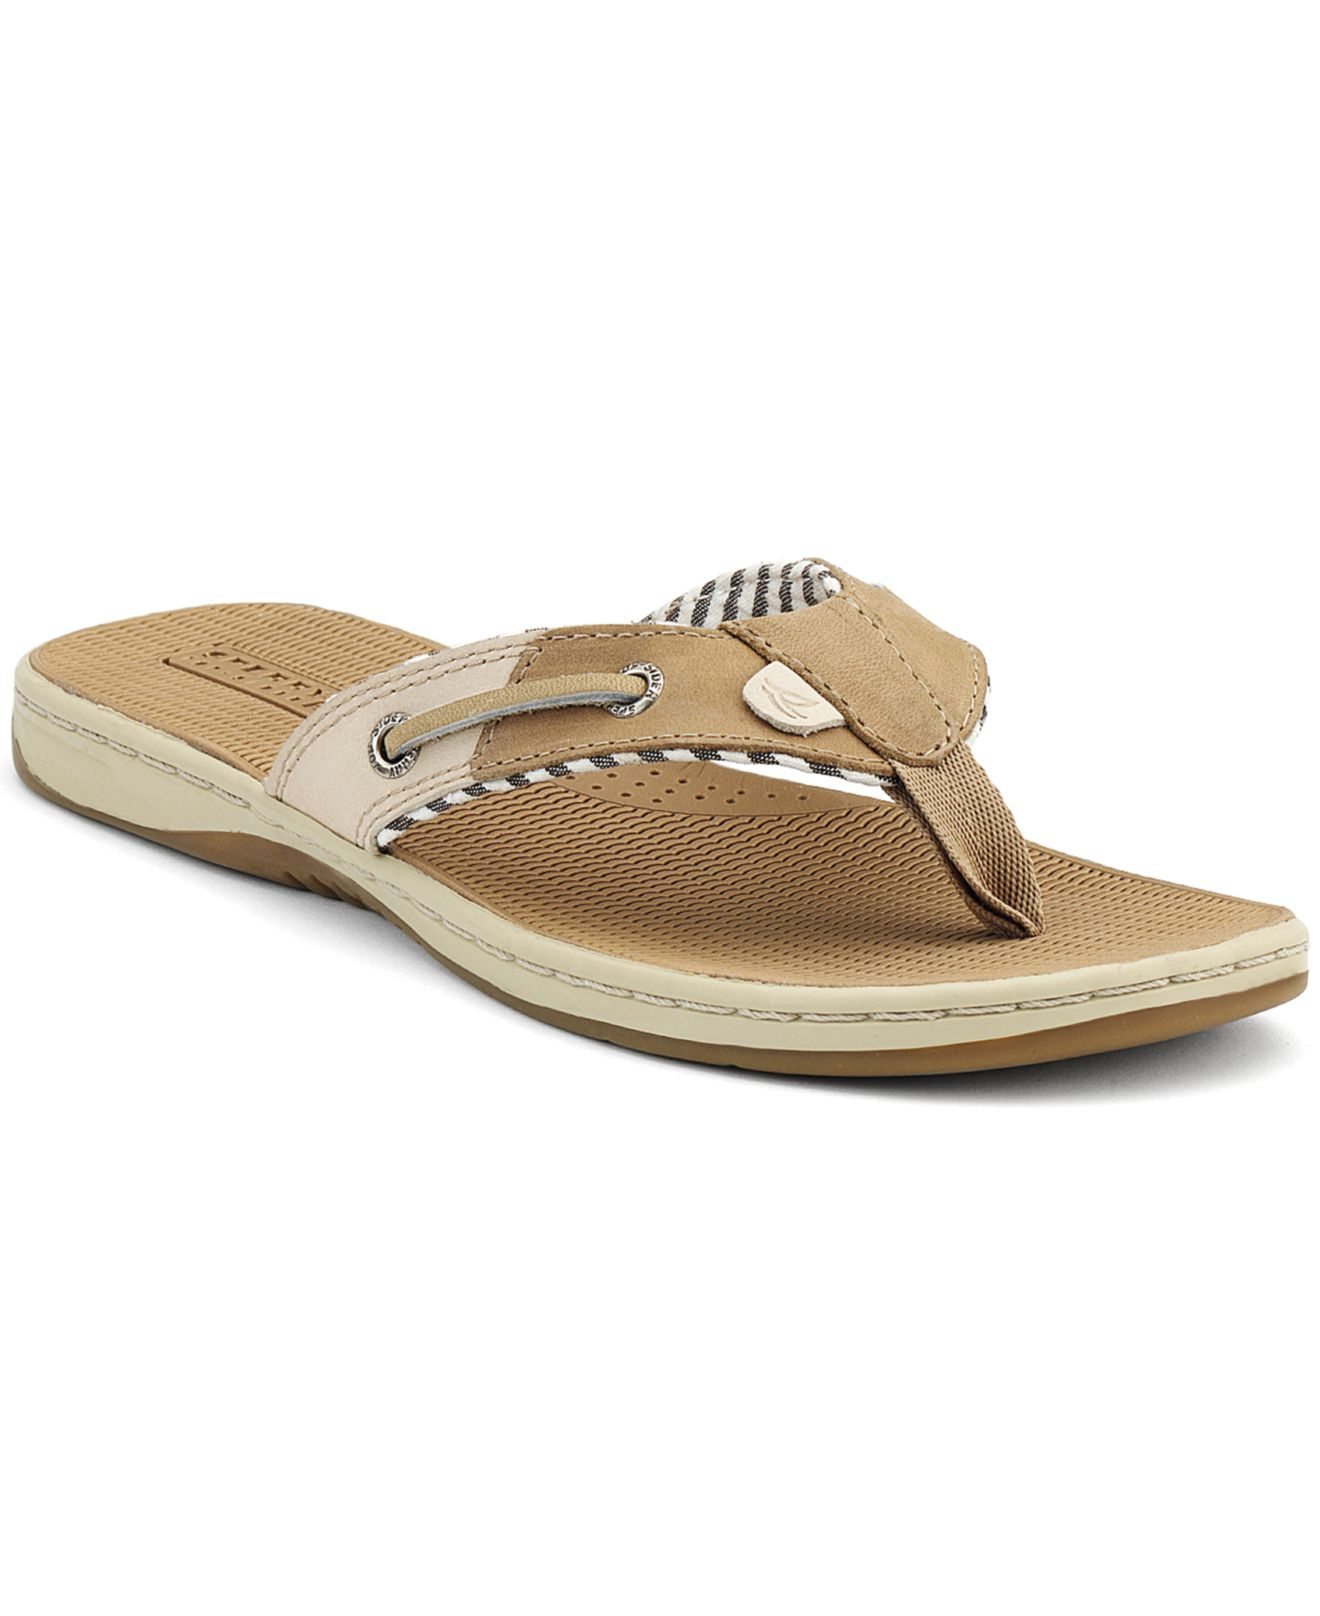 Sperry Top-Sider Women'S Thong Sandals Natural | Lyst